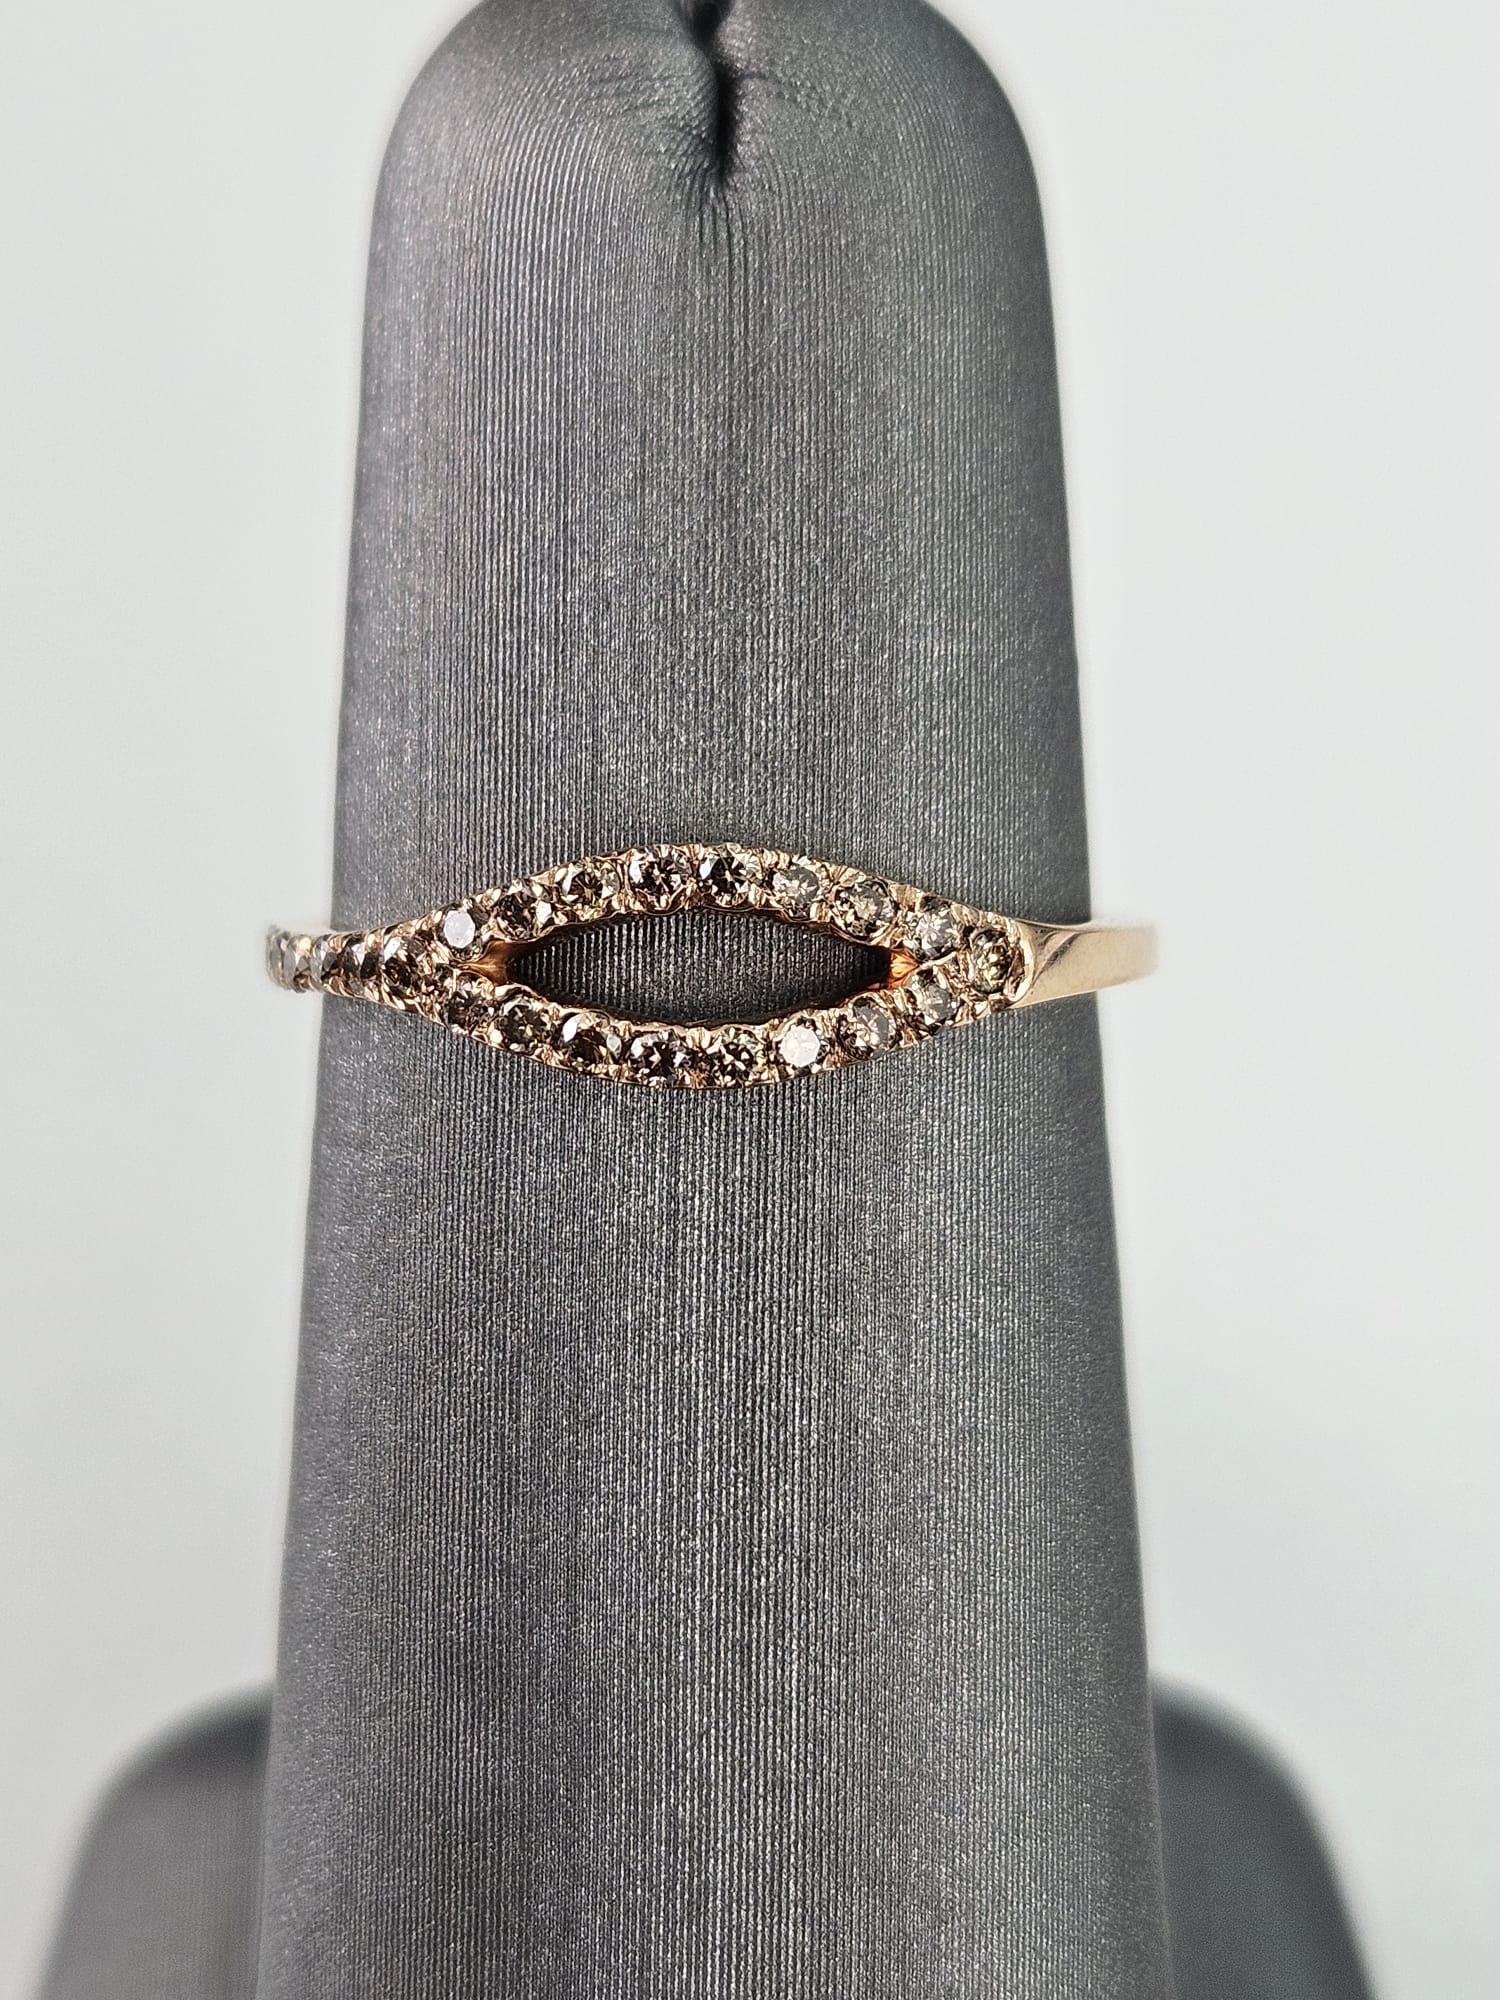 0.22 ct Brown Diamond Band Ring in Rose Gold In New Condition For Sale In New York, NY